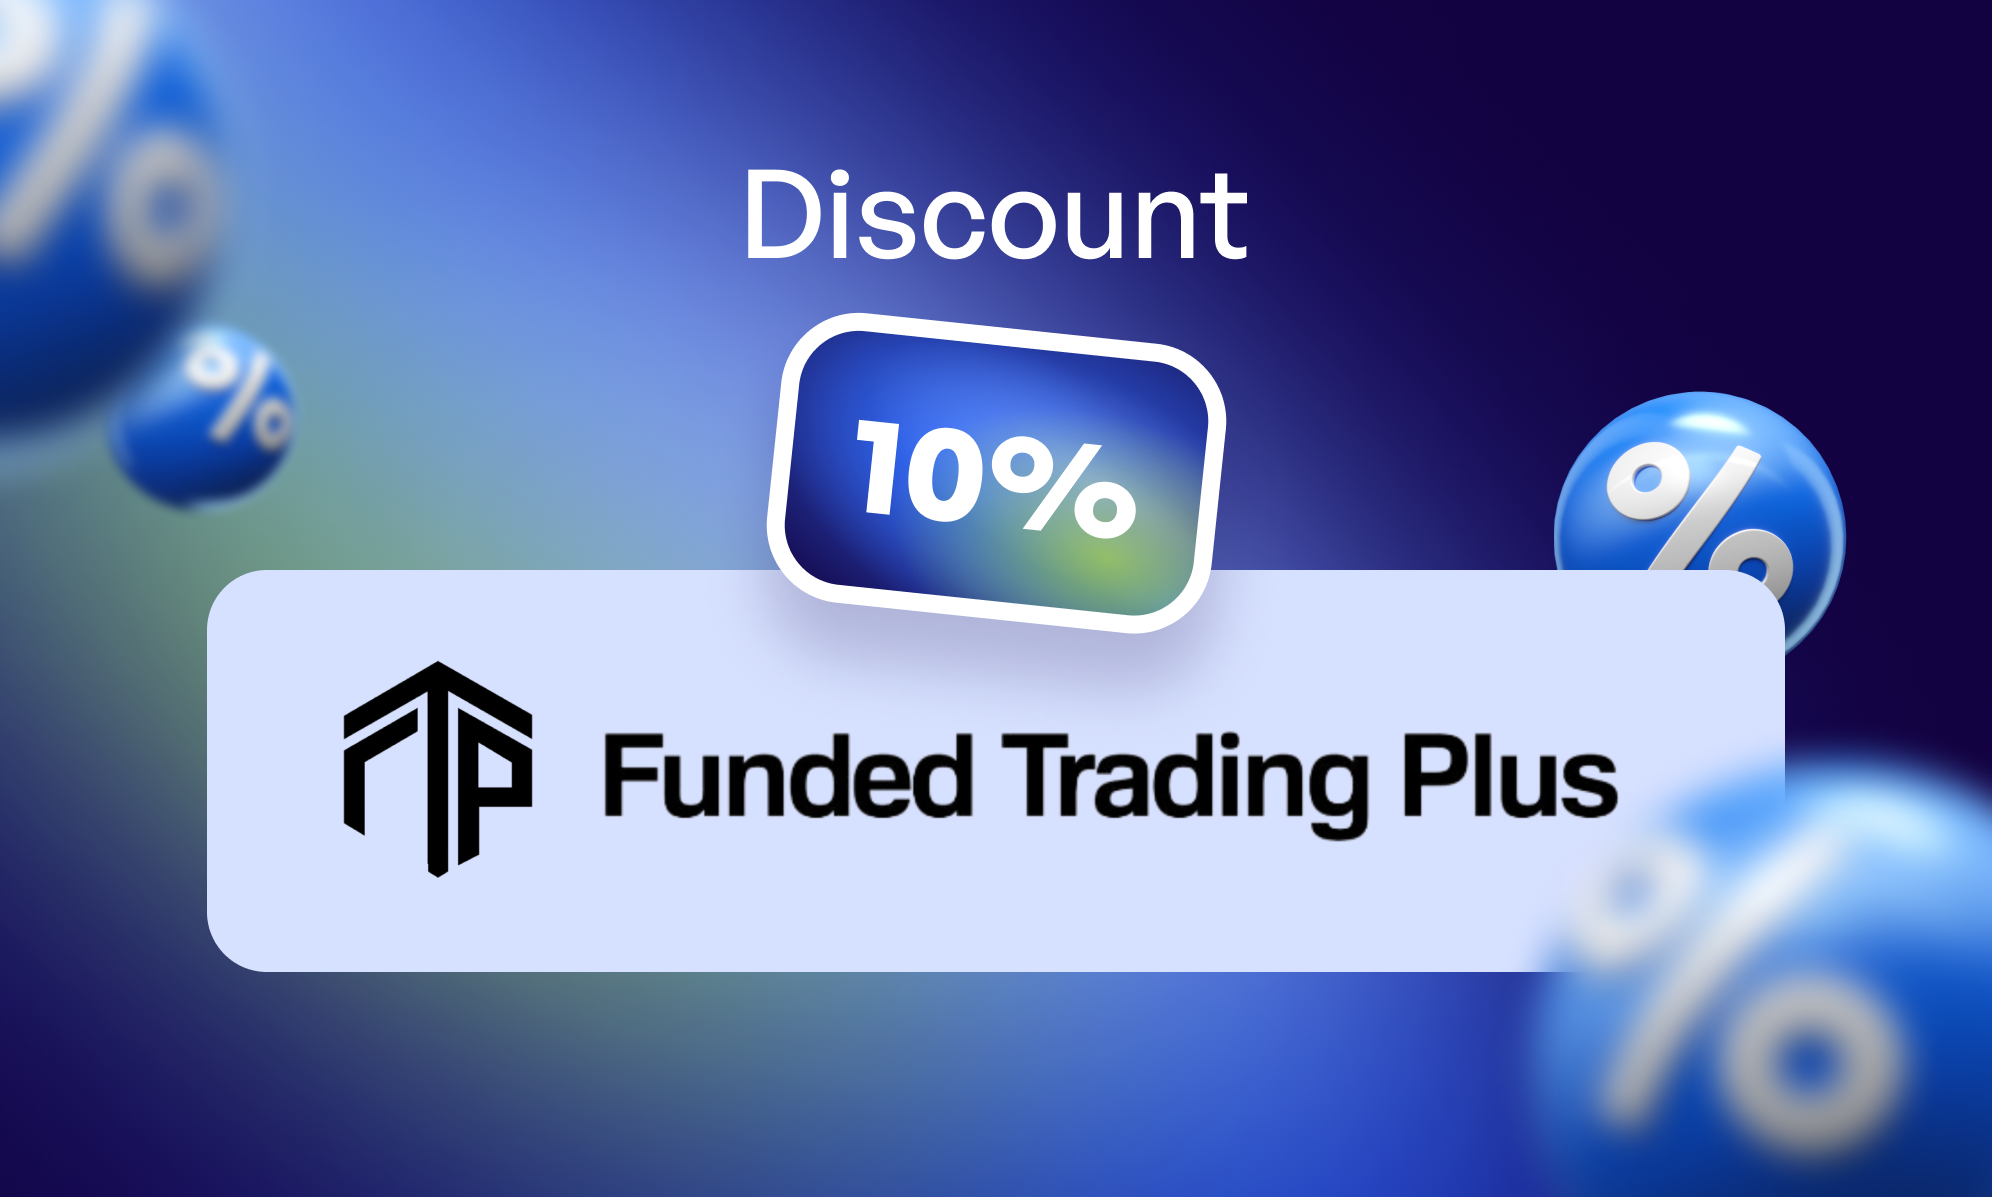 Get 10% Off Funding Trading Plus with fxprop promo code